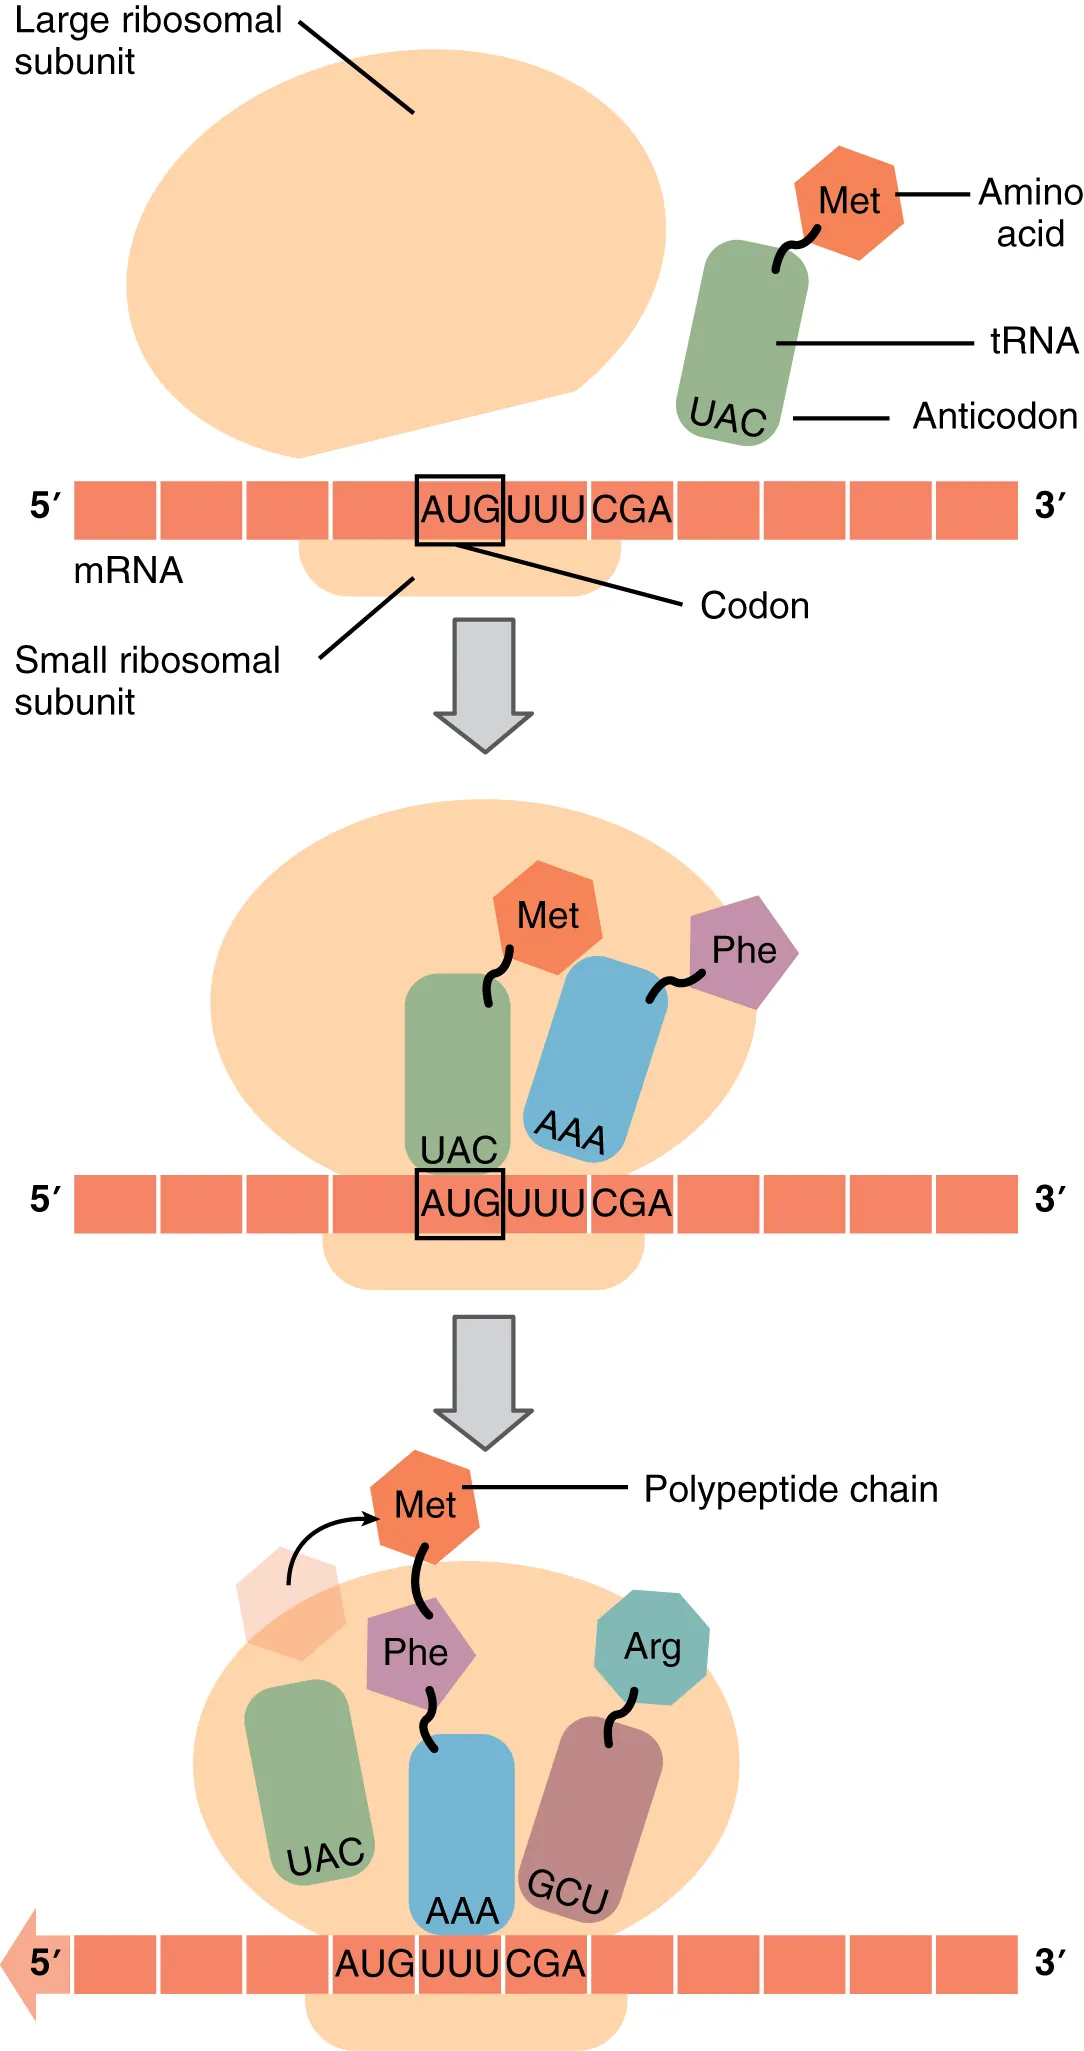 The top part of this figure shows a large ribosomal subunit coming into contact with the mRNA that already has the small ribosomal subunit attached. A tRNA and an anticodon are in proximity. In the second panel, the tRNA also binds to the same site as the ribosomal subunits. In the bottom panel, a polypeptide chain is shown emerging from the complex.